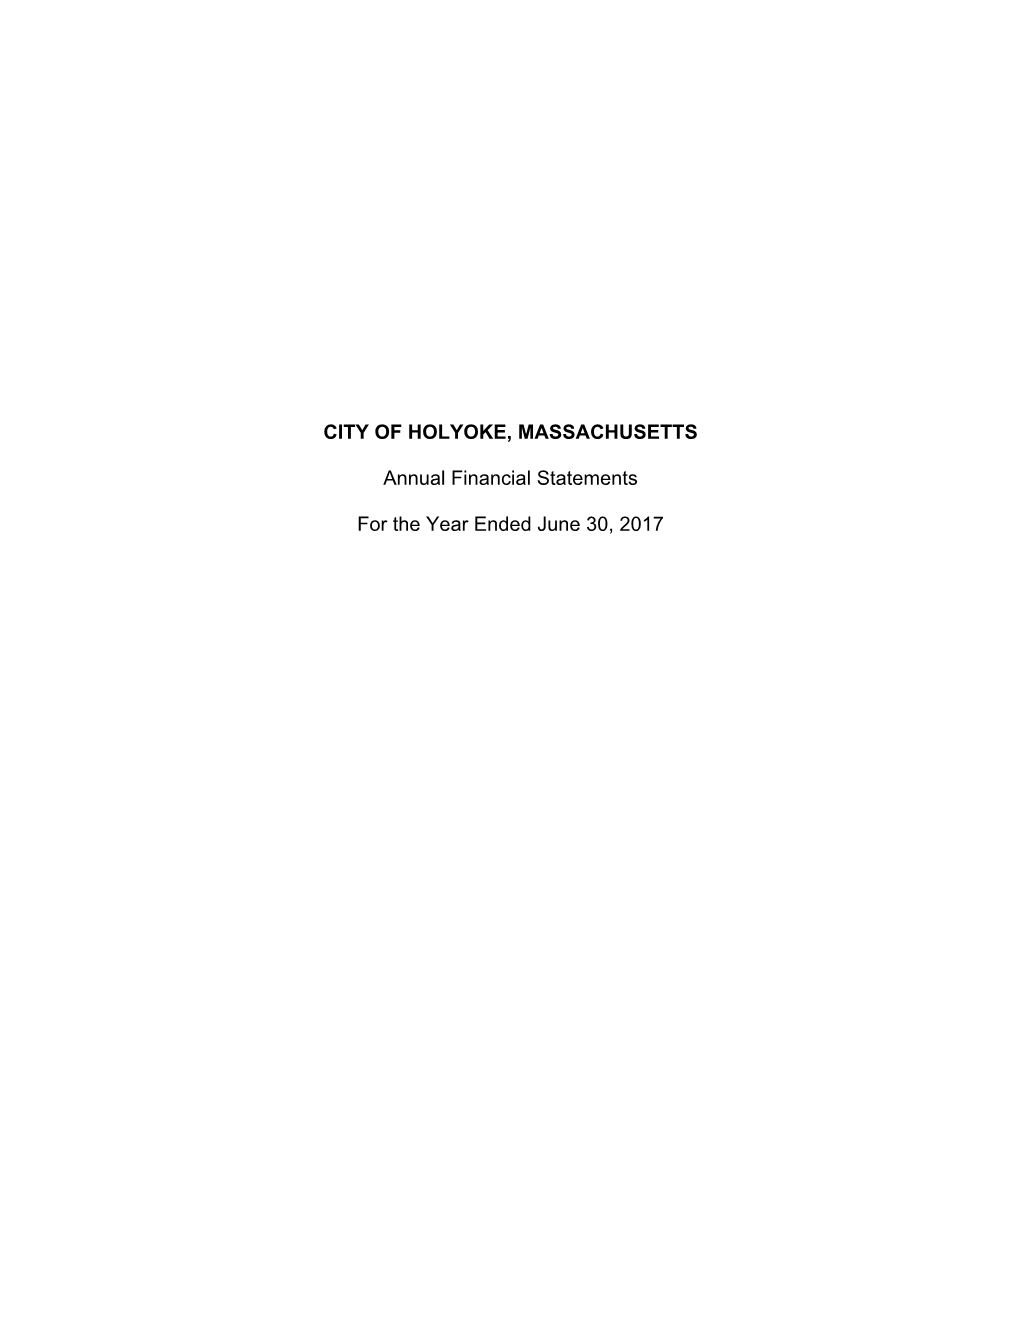 CITY of HOLYOKE, MASSACHUSETTS Annual Financial Statements for the Year Ended June 30, 2017